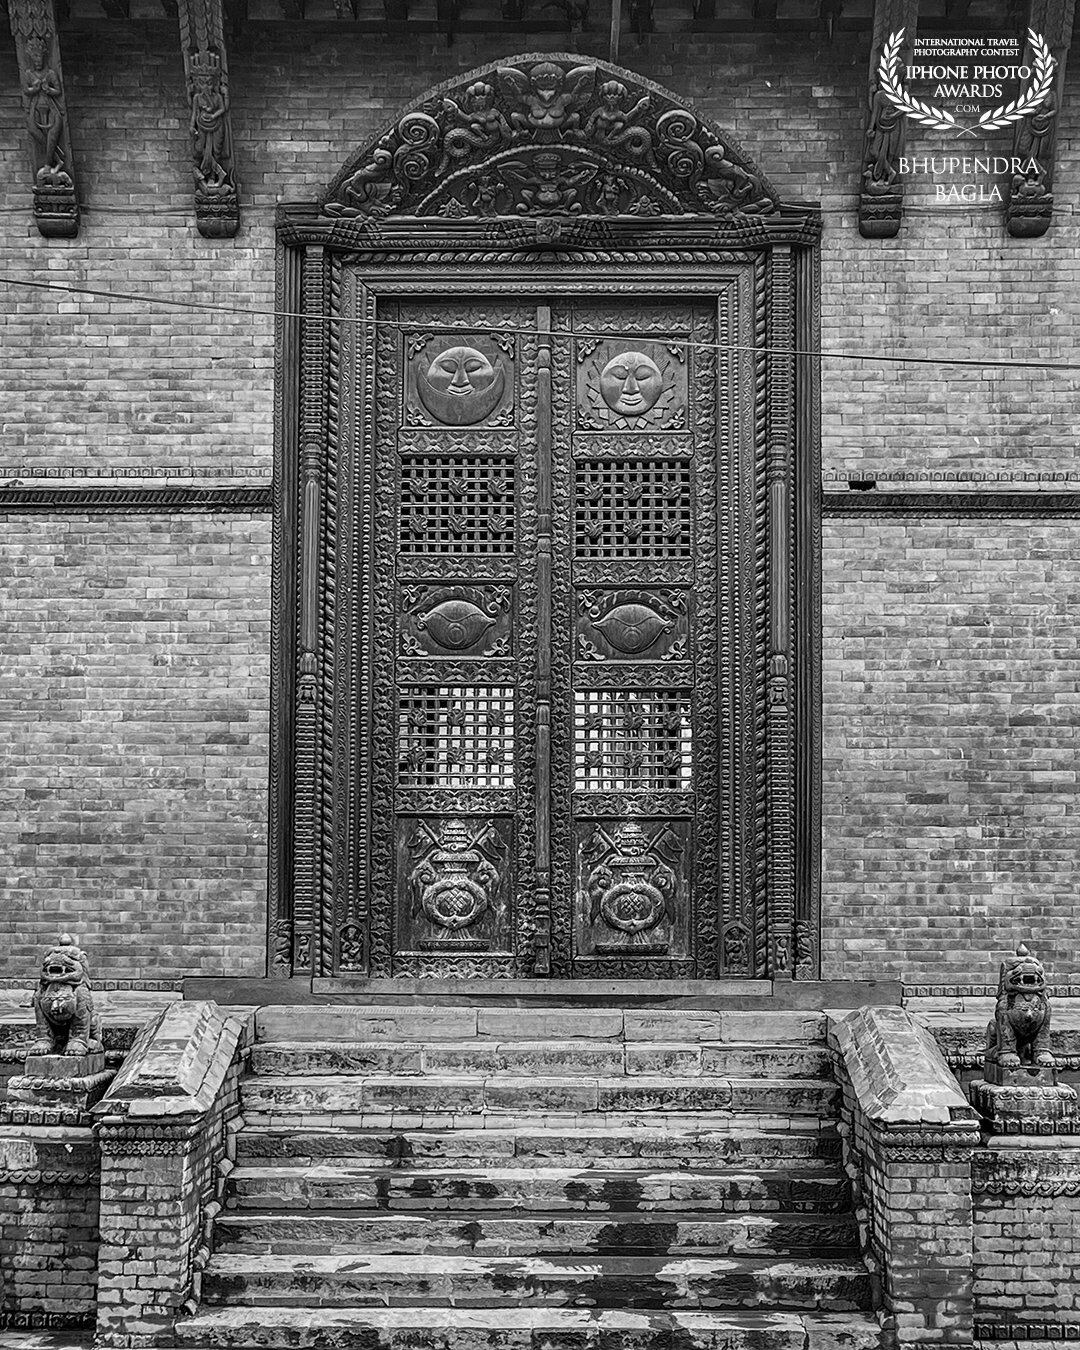 This was shot at the most famous temple in Kathmandu, Nepal. The staircase and the beautiful gigantic wooden door captured my eye and made a very good frame for photographing it. I converted it into black and white to add more vintage and raw look to the whole photograph.